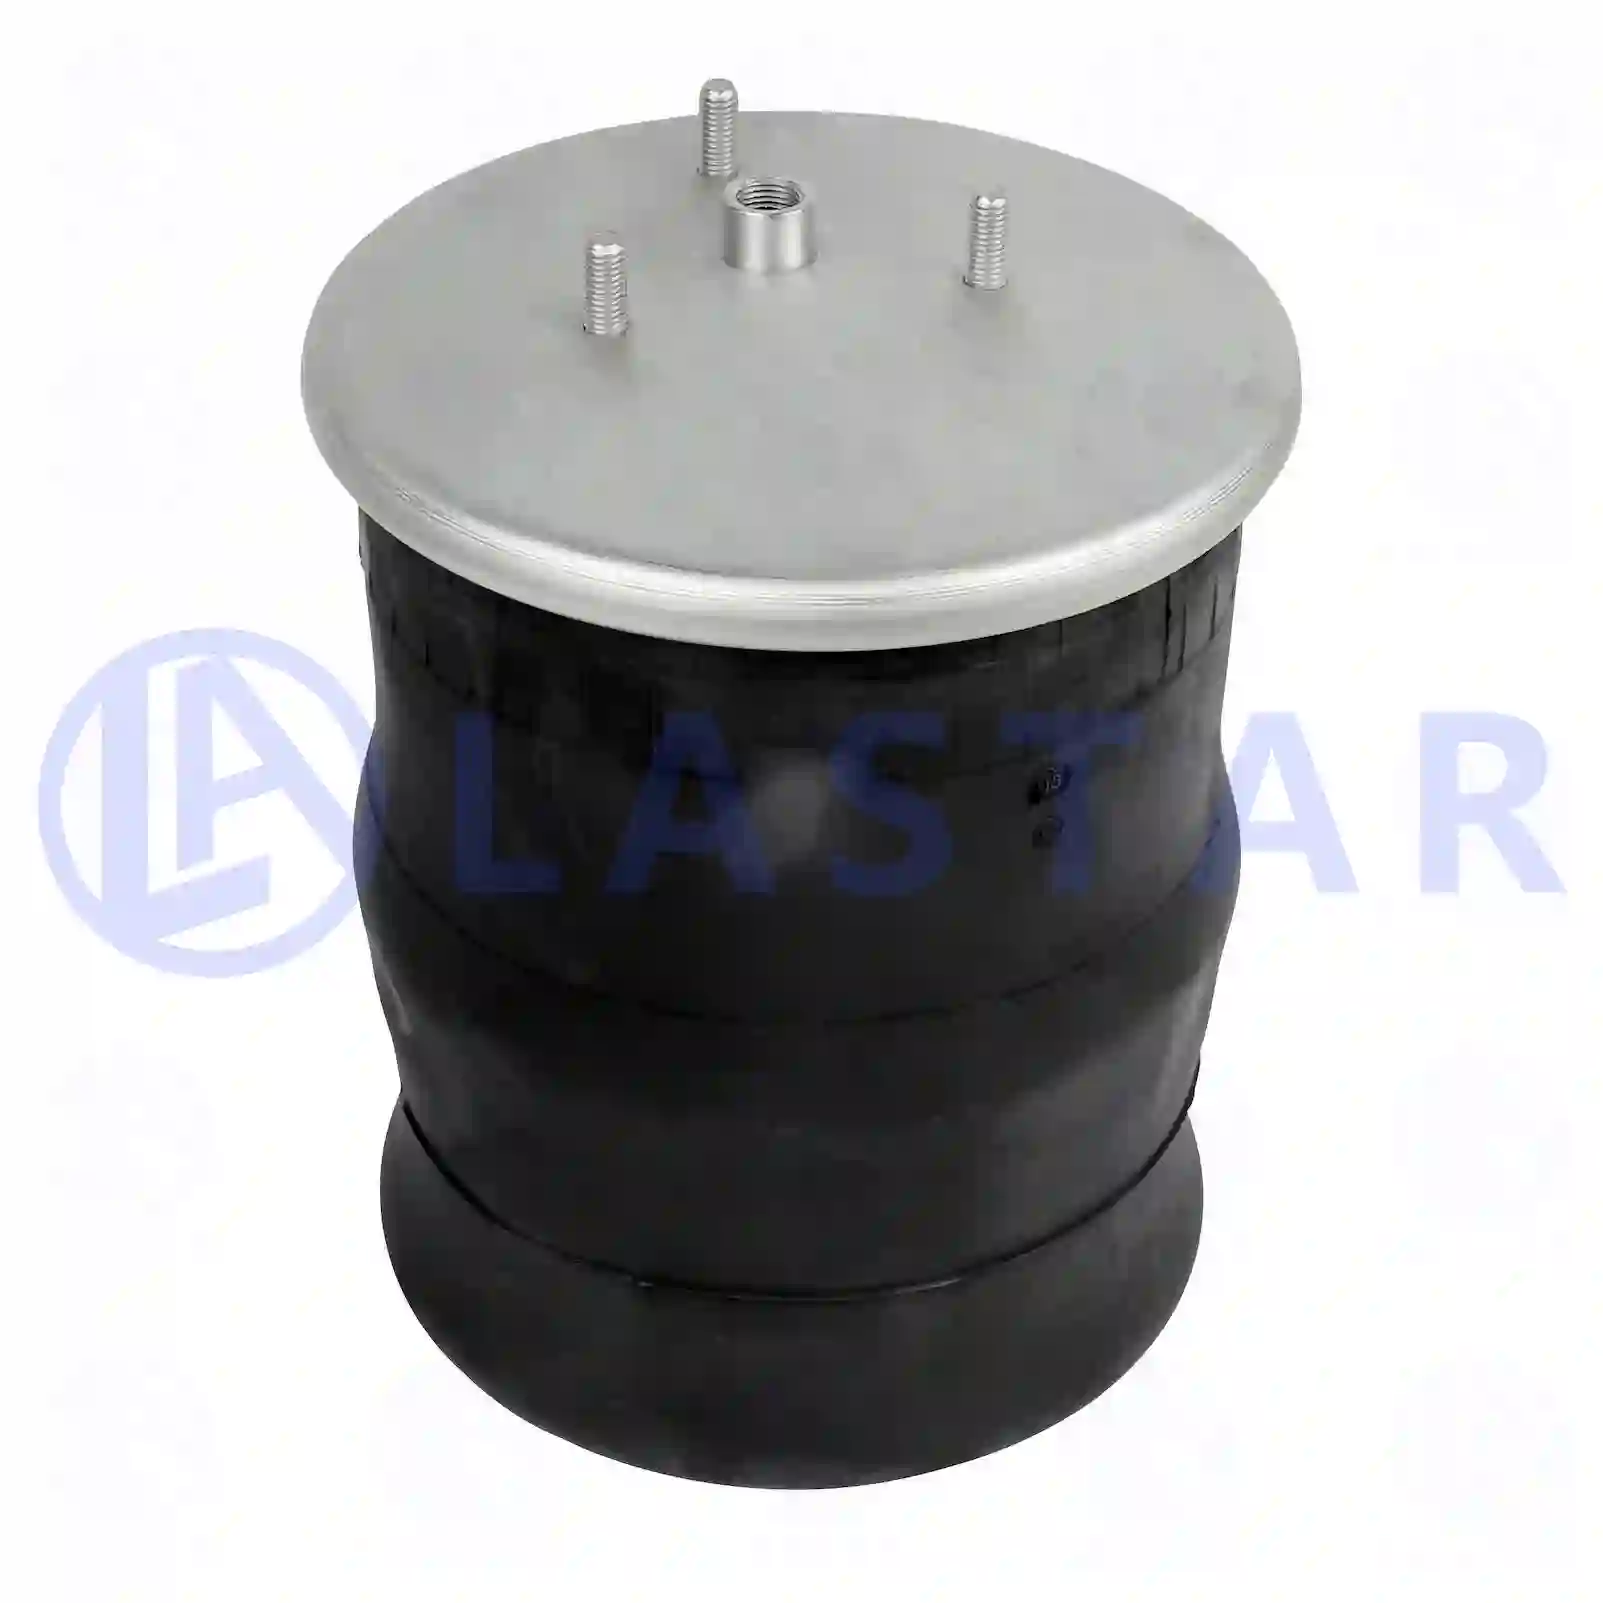 Air spring, with steel piston, 77728501, 1279141, 1529835, 1698434, 99984 ||  77728501 Lastar Spare Part | Truck Spare Parts, Auotomotive Spare Parts Air spring, with steel piston, 77728501, 1279141, 1529835, 1698434, 99984 ||  77728501 Lastar Spare Part | Truck Spare Parts, Auotomotive Spare Parts